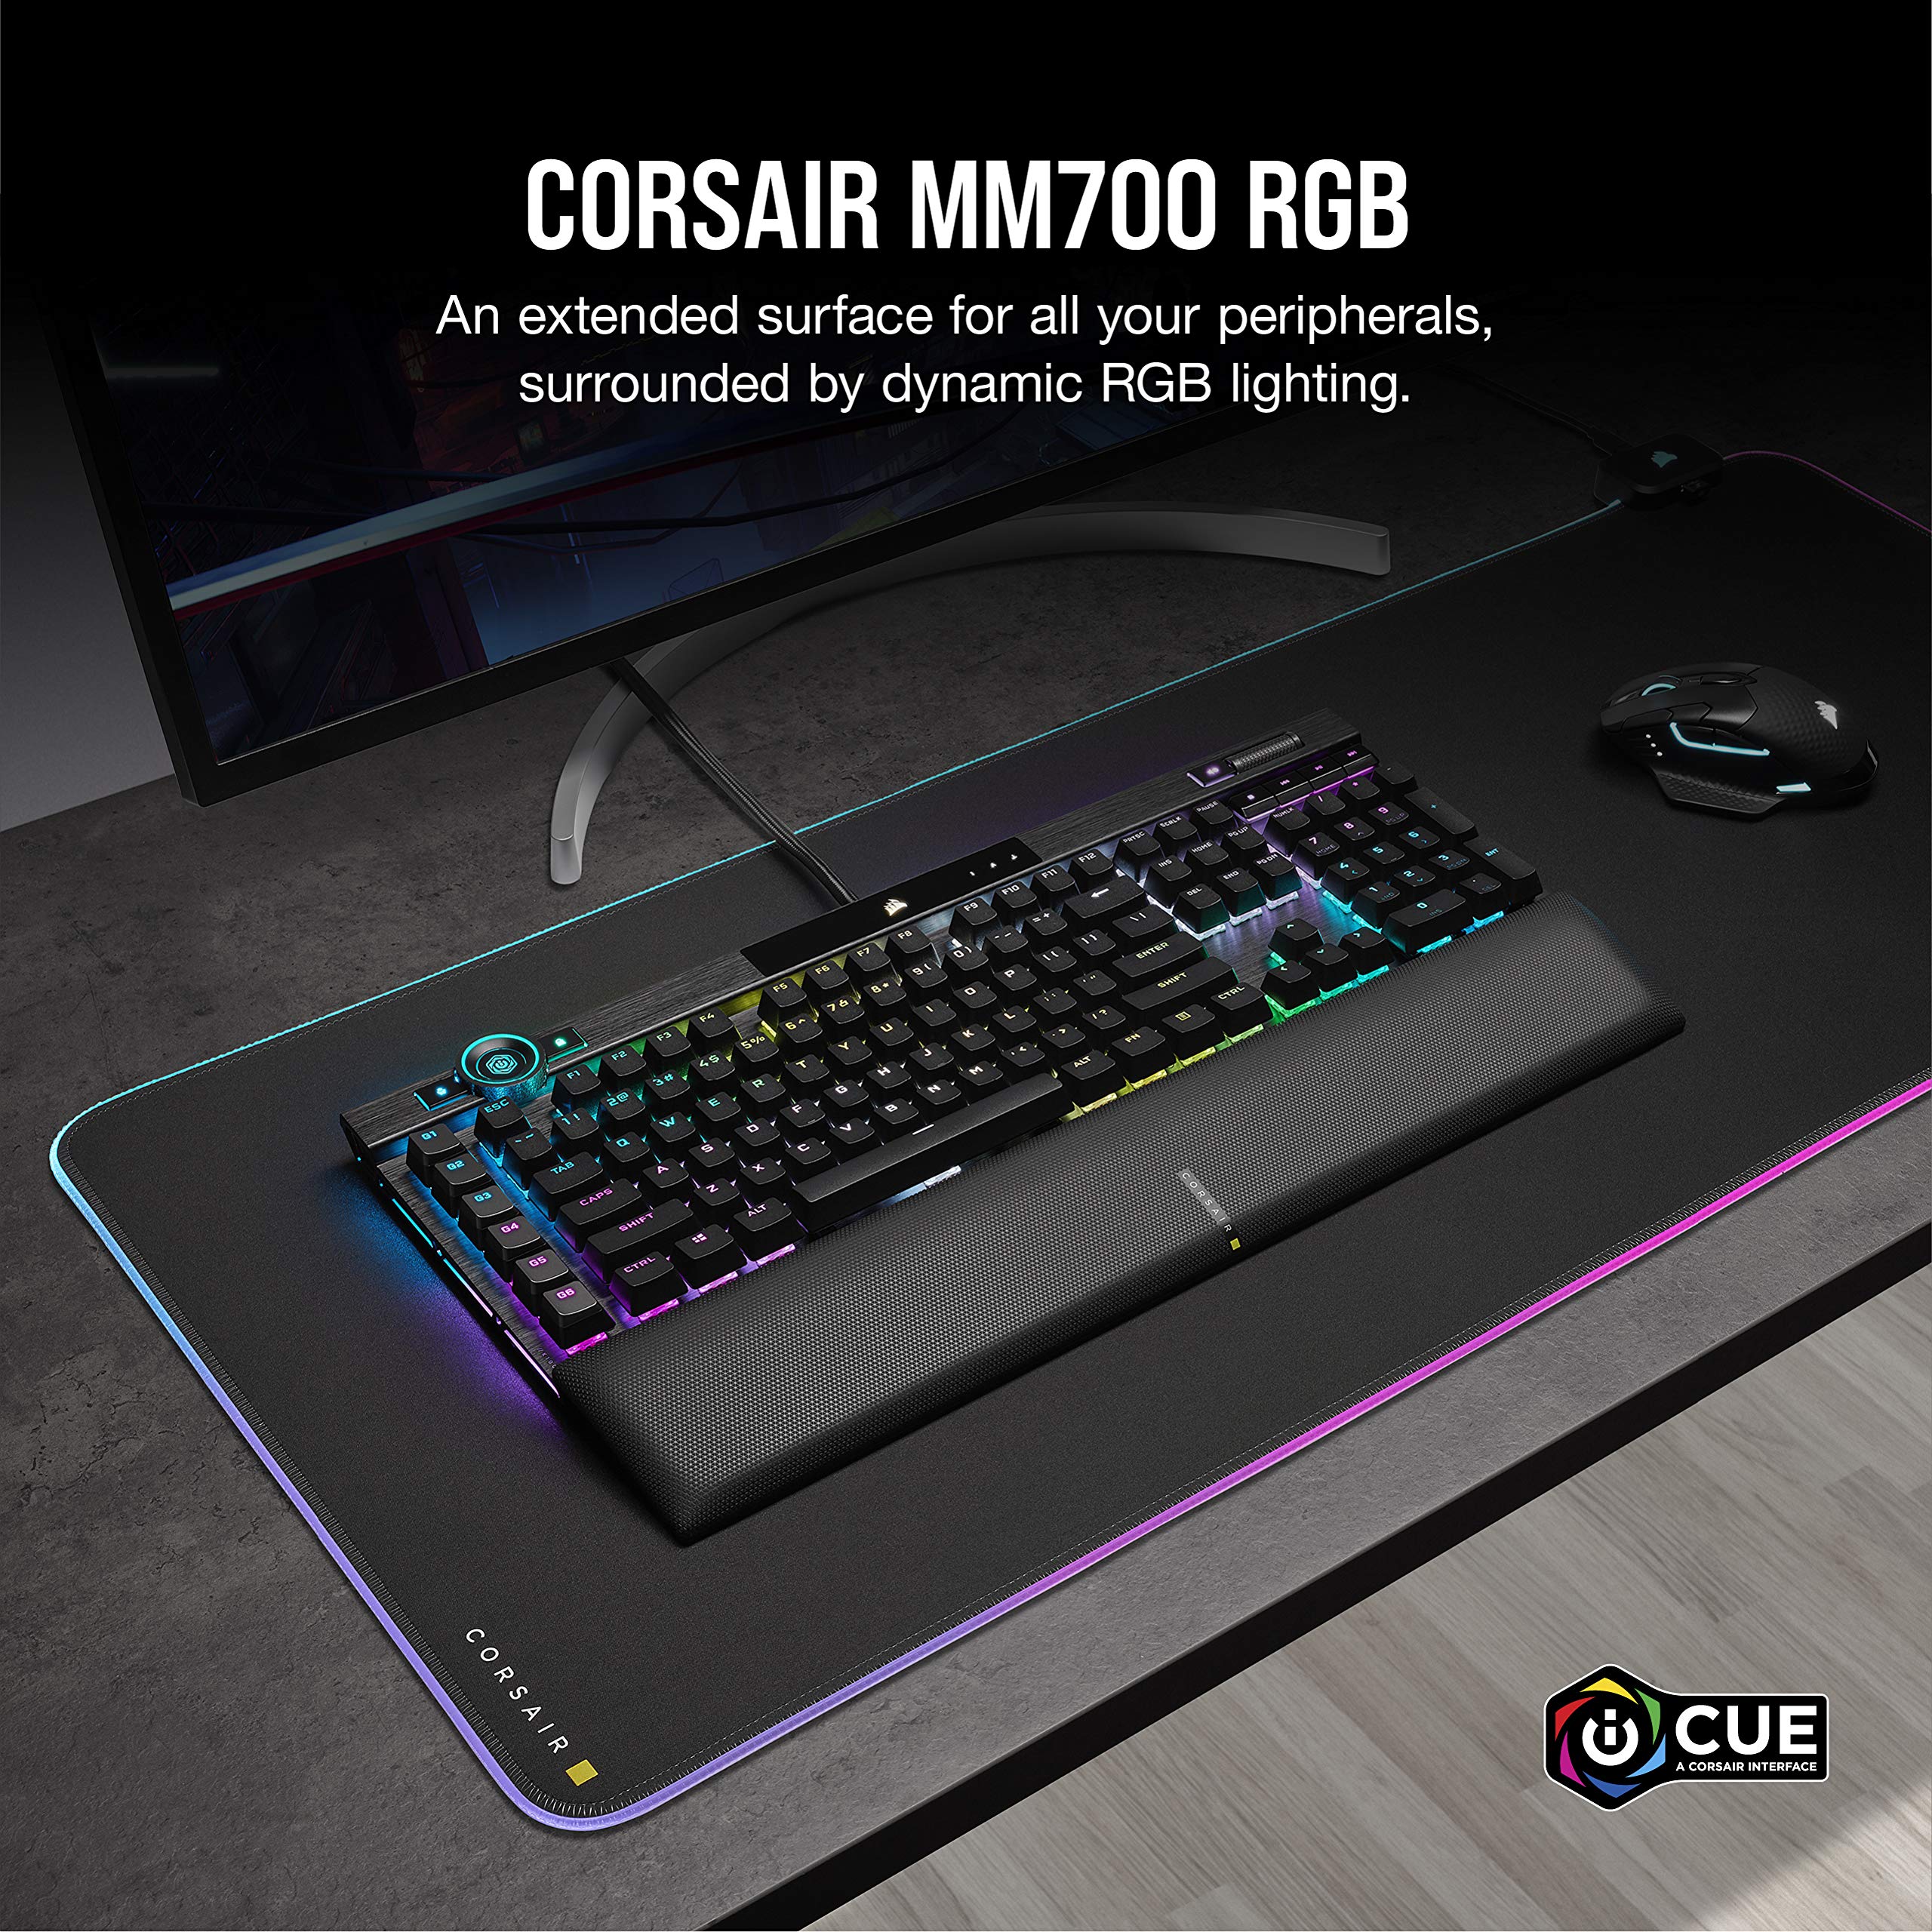 Corsair HS80 RGB Wireless Premium Gaming Headset with Spatial Audio - Works with Mac, PC, PS5, PS4 - Carbon & MM700 RGB Extended Cloth Gaming Mouse Pad